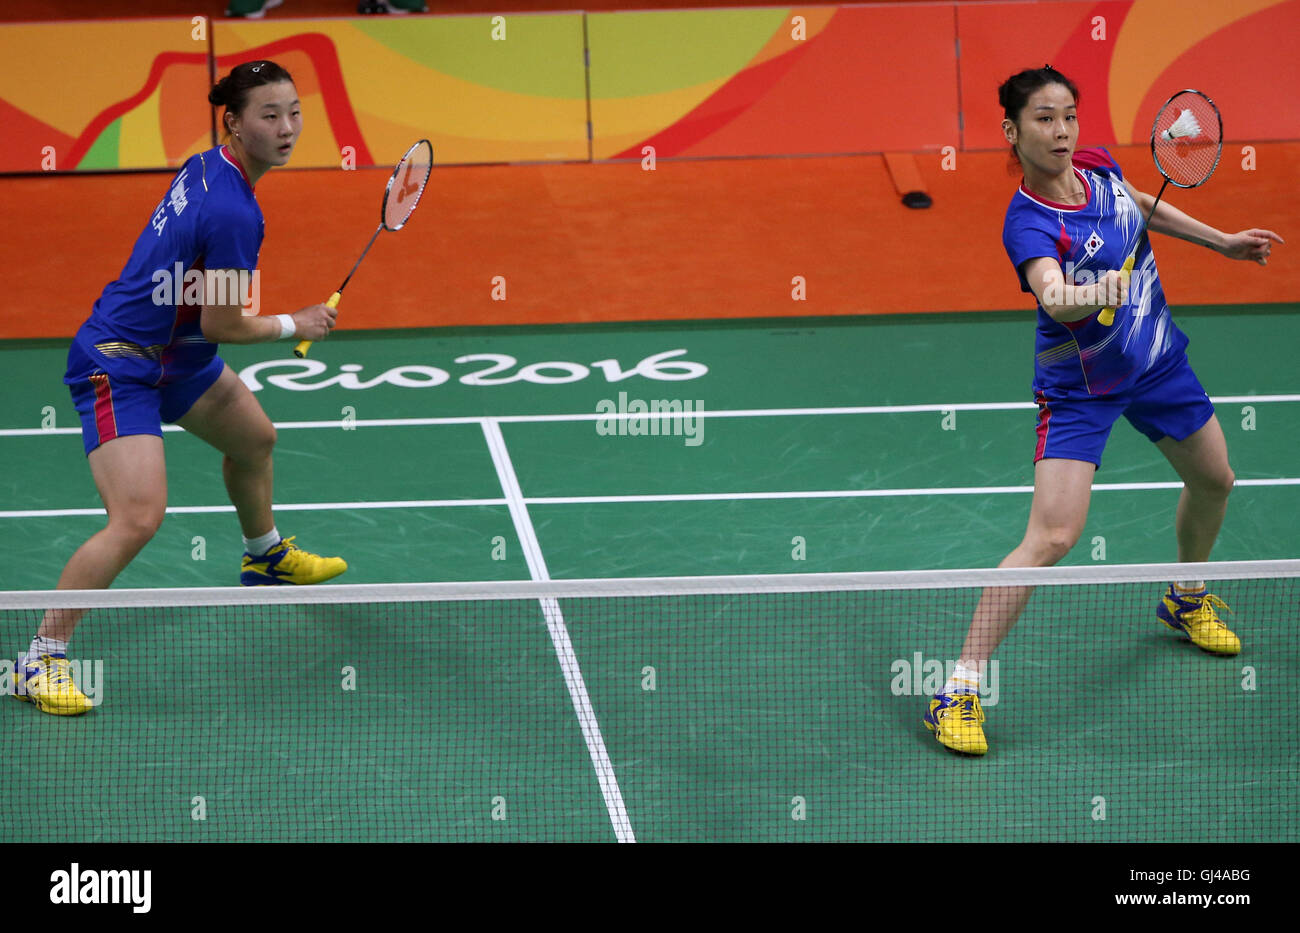 Rio De Janeiro, Brazil. 12th Aug, 2016. South Korea's Jung Kyung Eun (R) and Shin Seung Chan compete against China's Luo Ying and Luo Yu during women's doubles group play stage match of Badminton at the 2016 Rio Olympic Games in Rio de Janeiro, Brazil, on Aug. 12, 2016. Jung Kyung Eun and Shin Seung Chang won the match 2-0. Credit:  Qin Lang/Xinhua/Alamy Live News Stock Photo